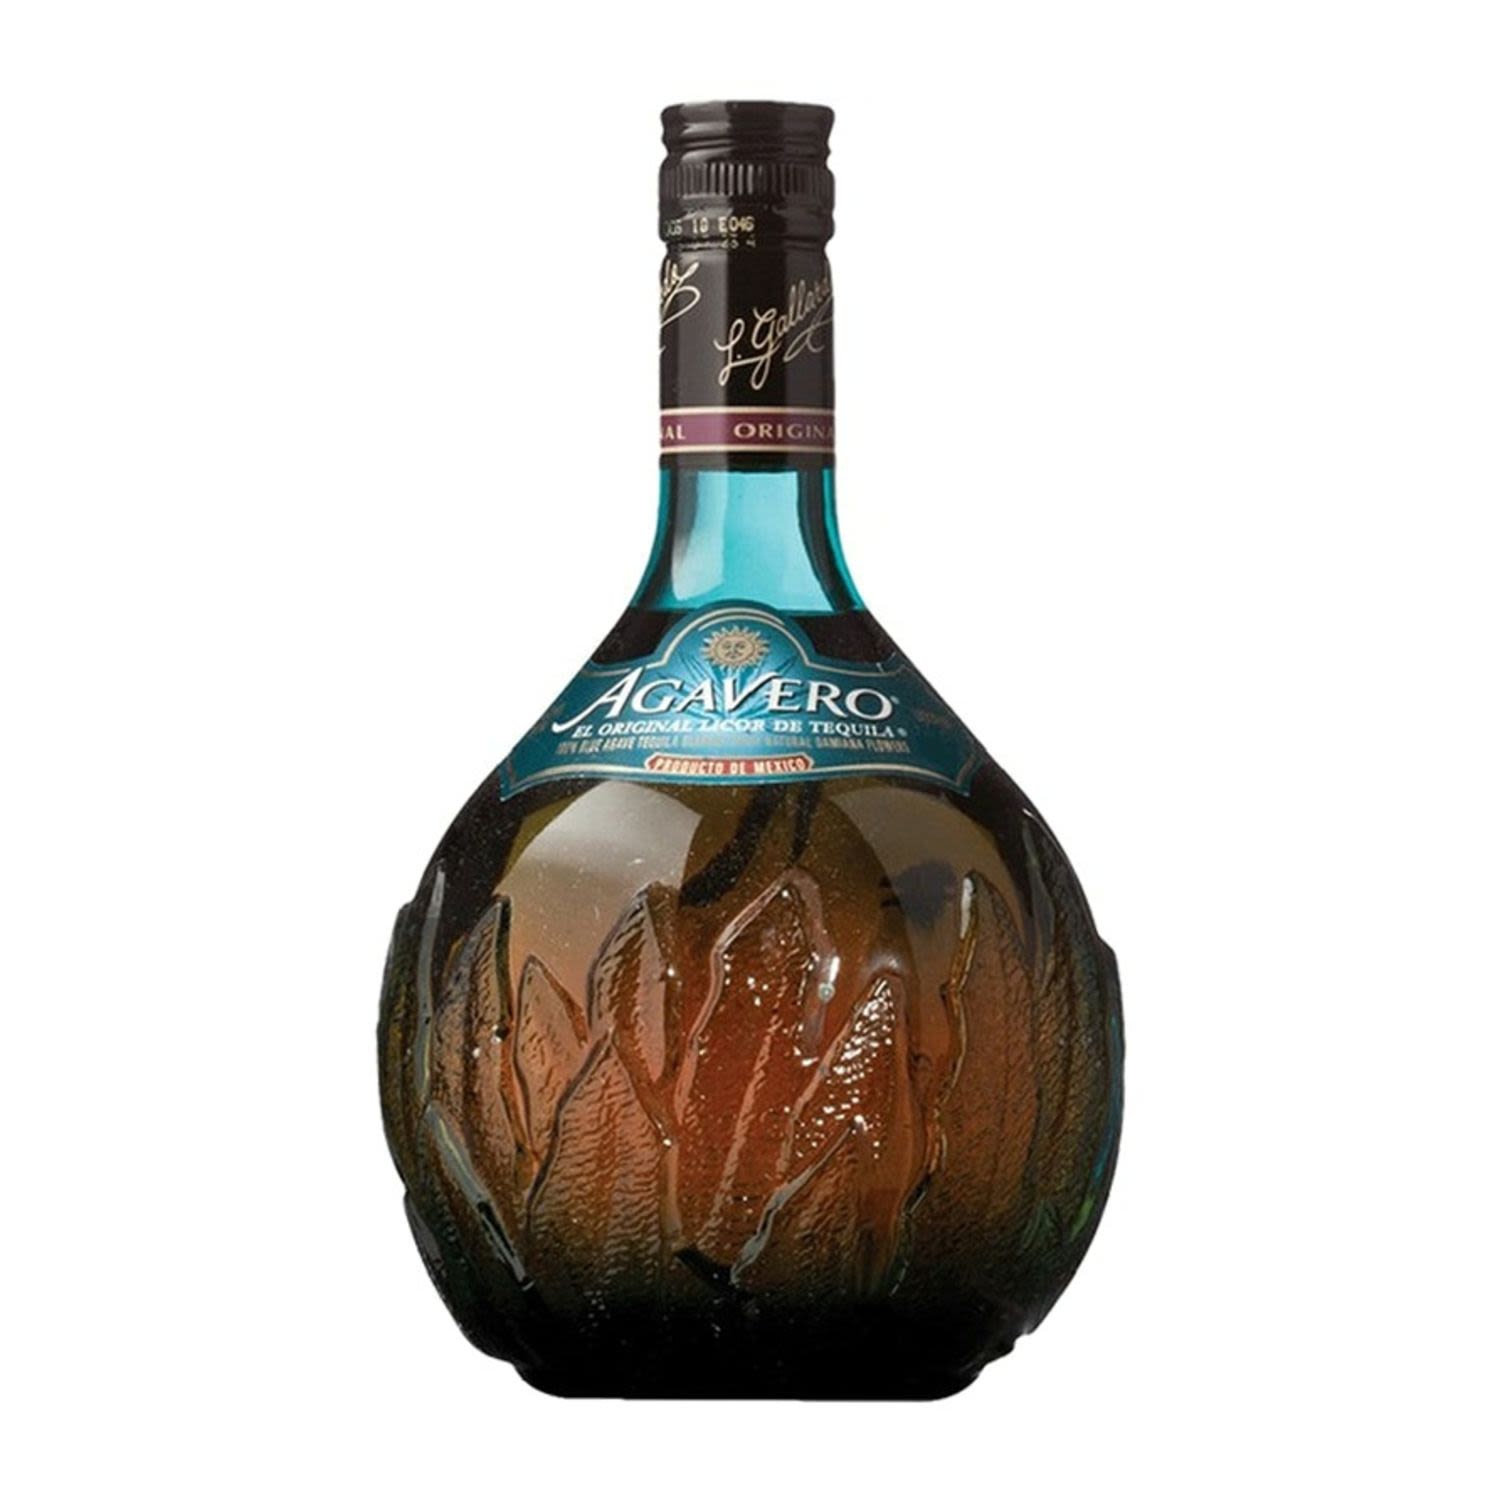 A 100% blue agave tequila blended with essence of the Damiana flower. Indigenous to the mountains of Jalisco, legend tells of the Damianas power to stir up passion between admirers.<br /> <br />Alcohol Volume: 32.00%<br /><br />Pack Format: Bottle<br /><br />Standard Drinks: 18.9</br /><br />Pack Type: Bottle<br />